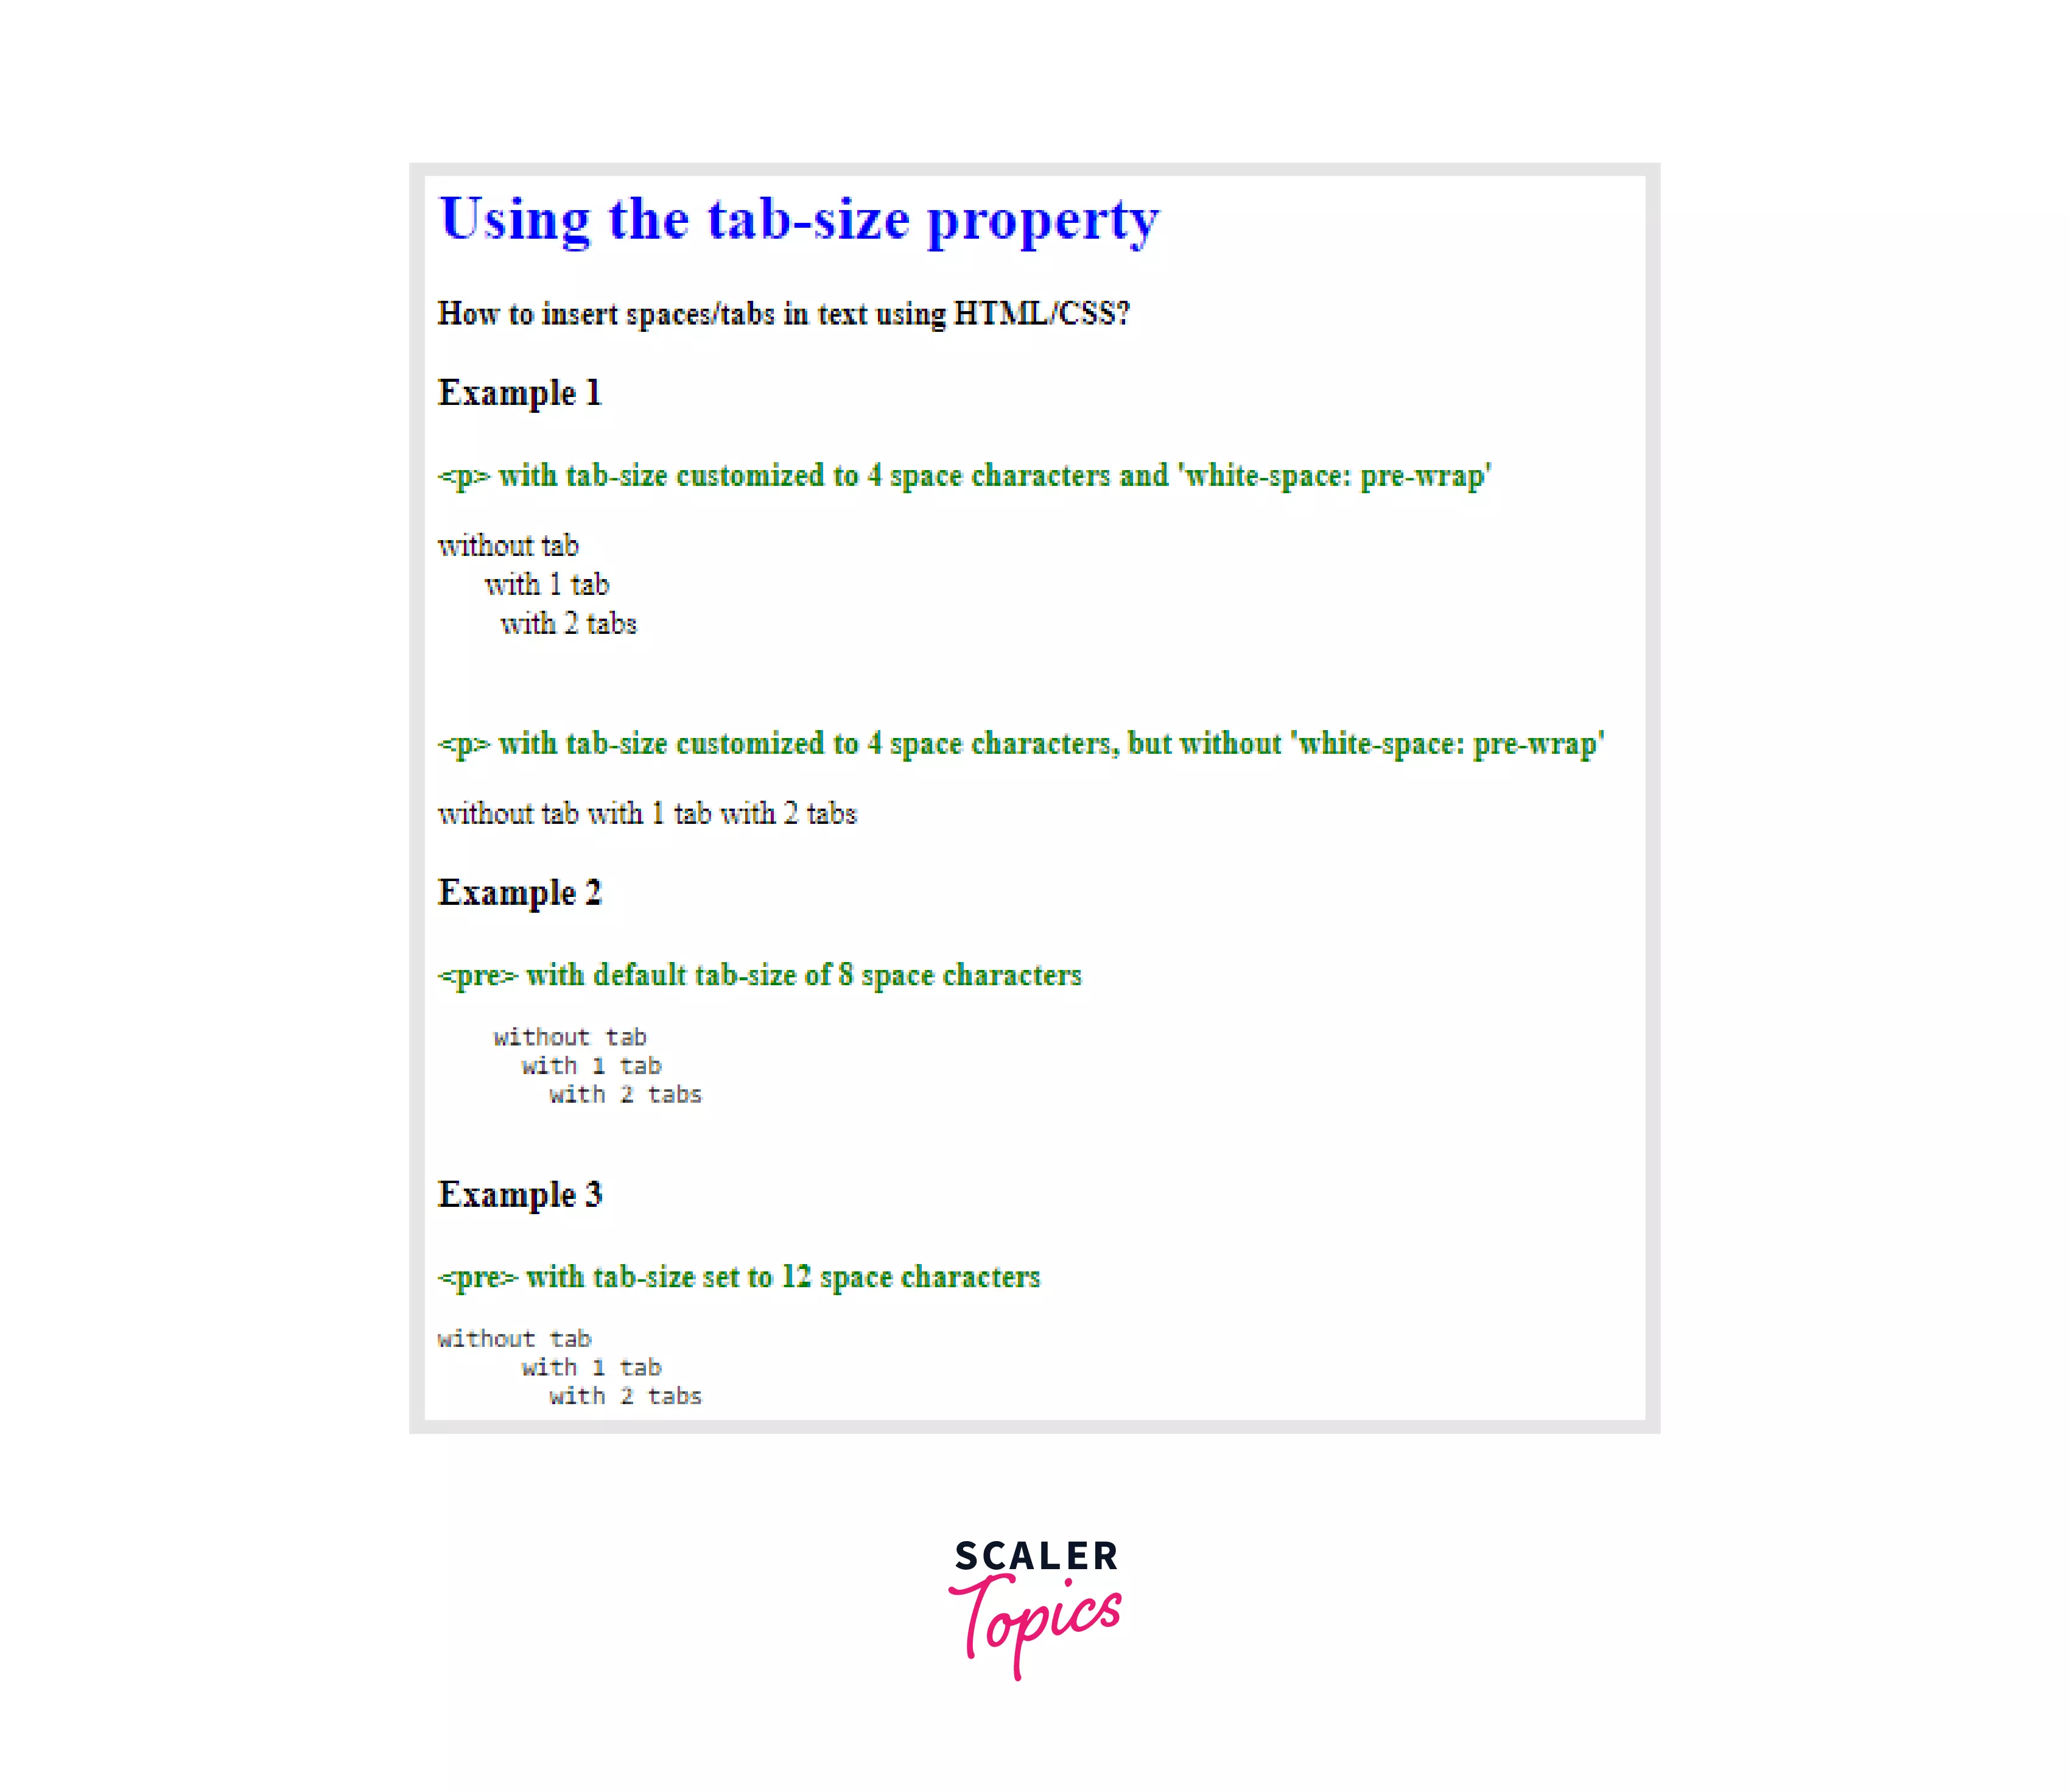 Using the tab-size property